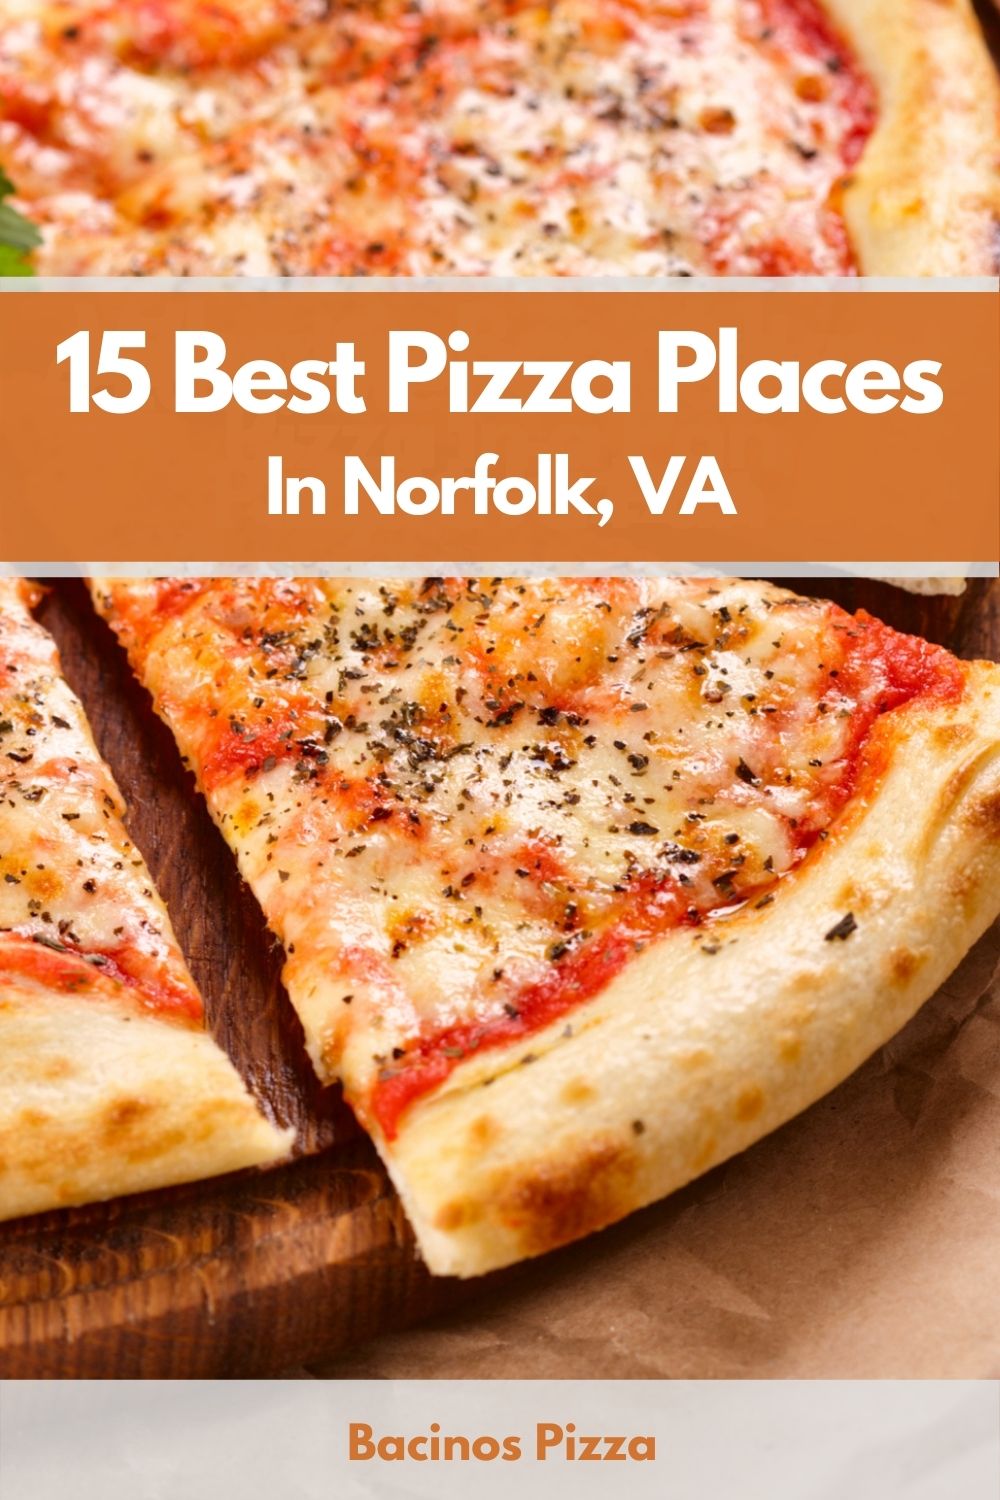 15 Best Pizza Places In Norfolk, VA pin 2